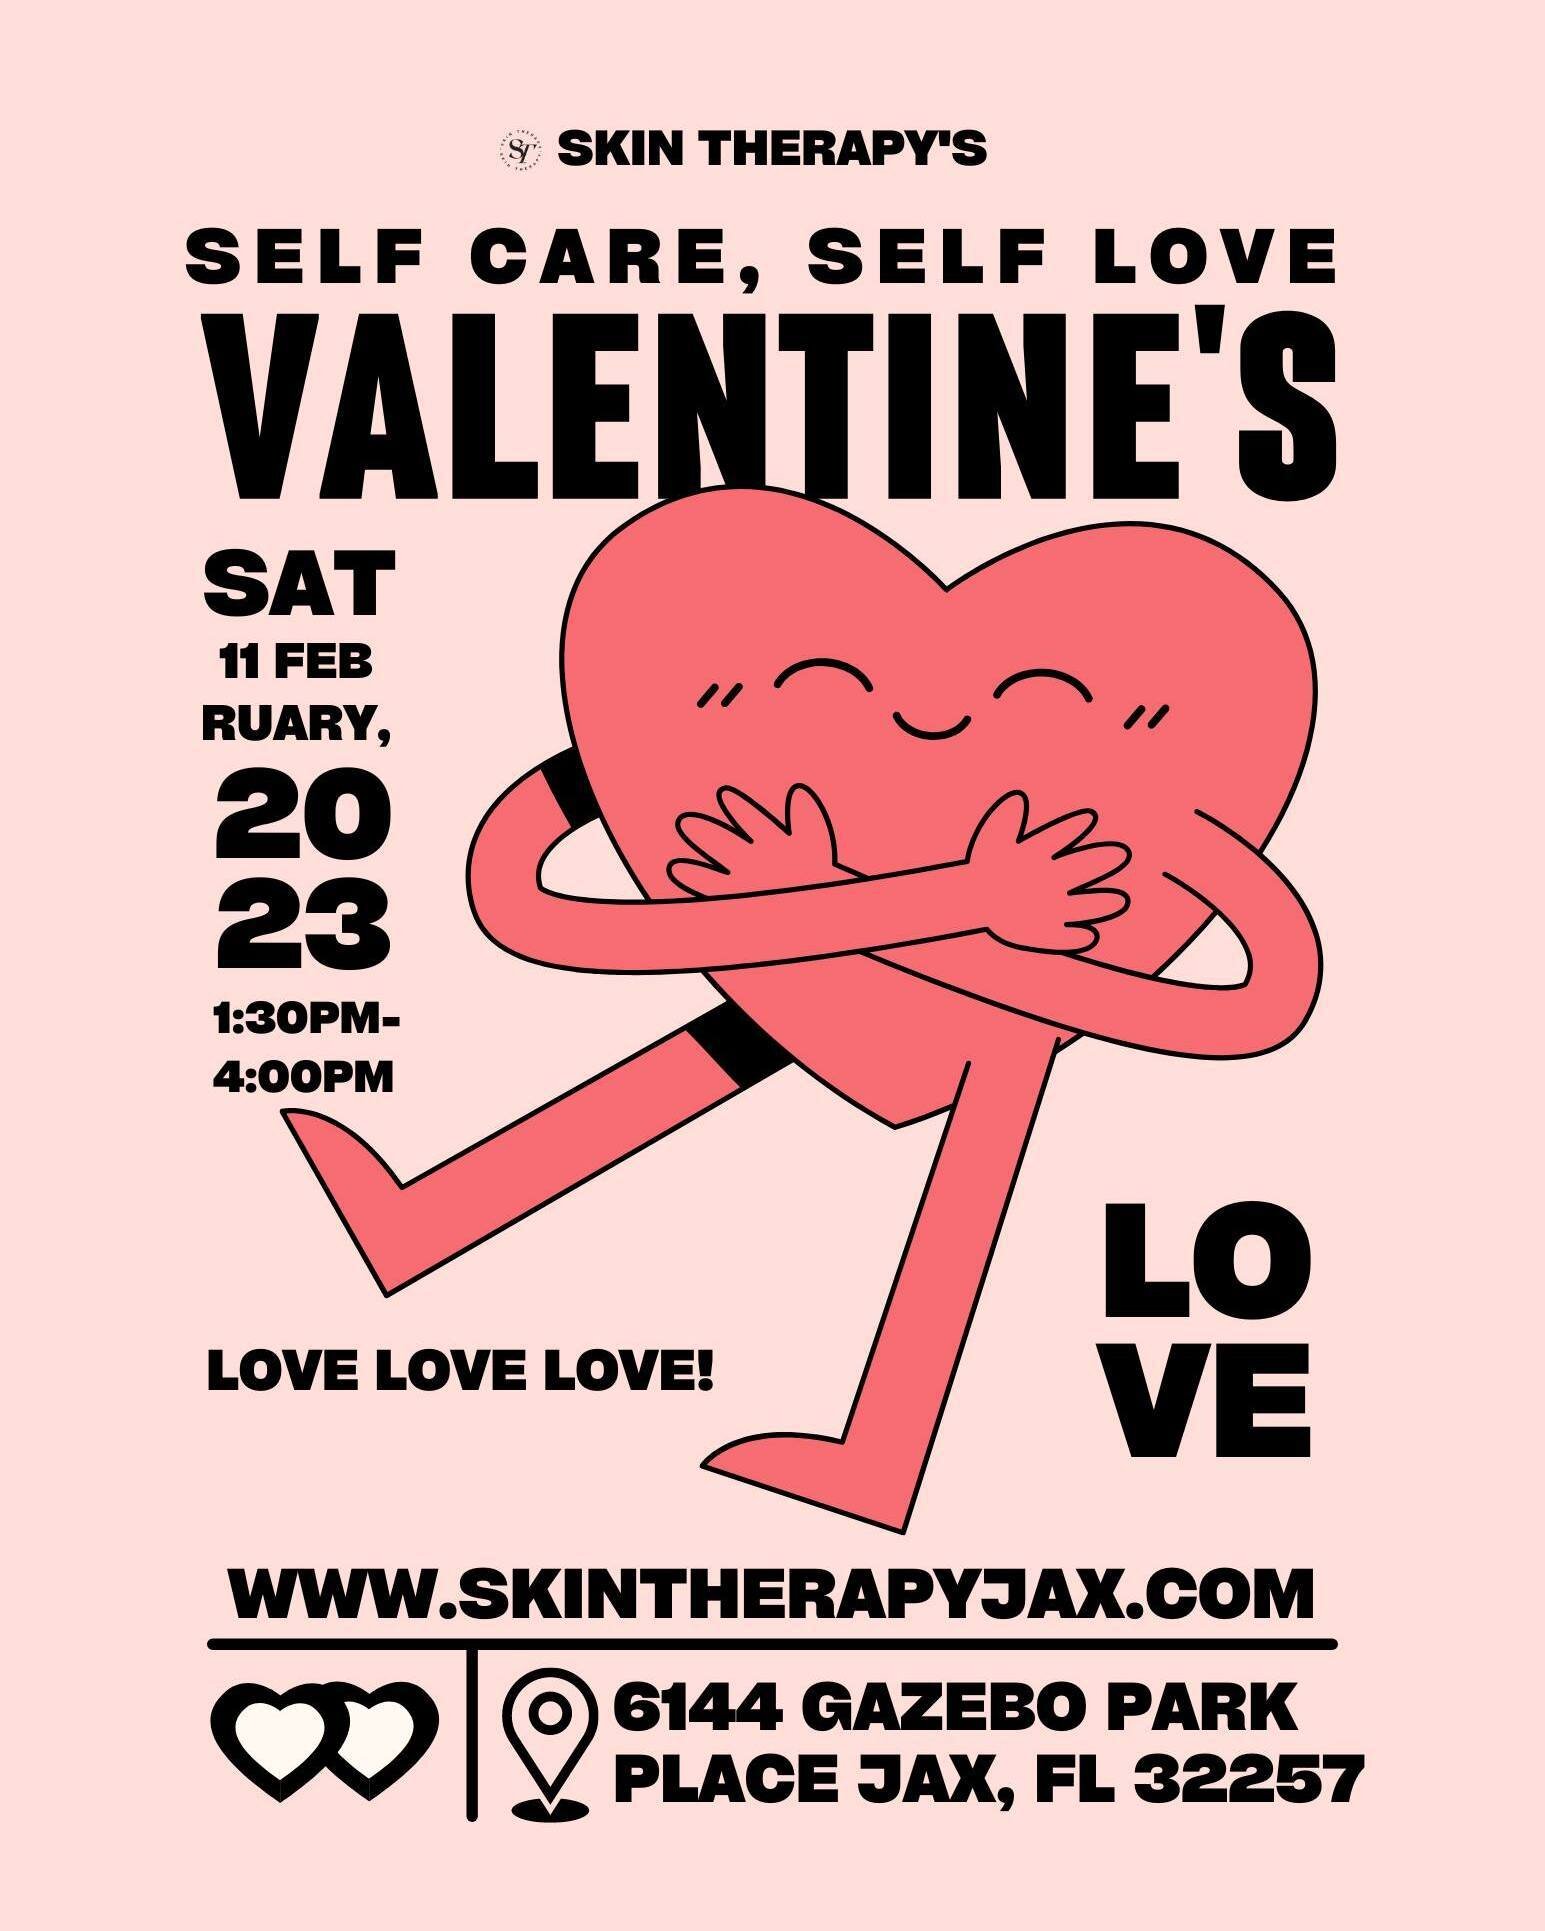 2022 Galentines Day was so much, Skin Therapy wants to show some love to fellas as well :) Let's skip feeling blue this V-Day season, and celebrate,  the Greatest Love of All .. sing it, Whitney!- SELF-LOVE.

Please join us at Skin Therapy studio - S